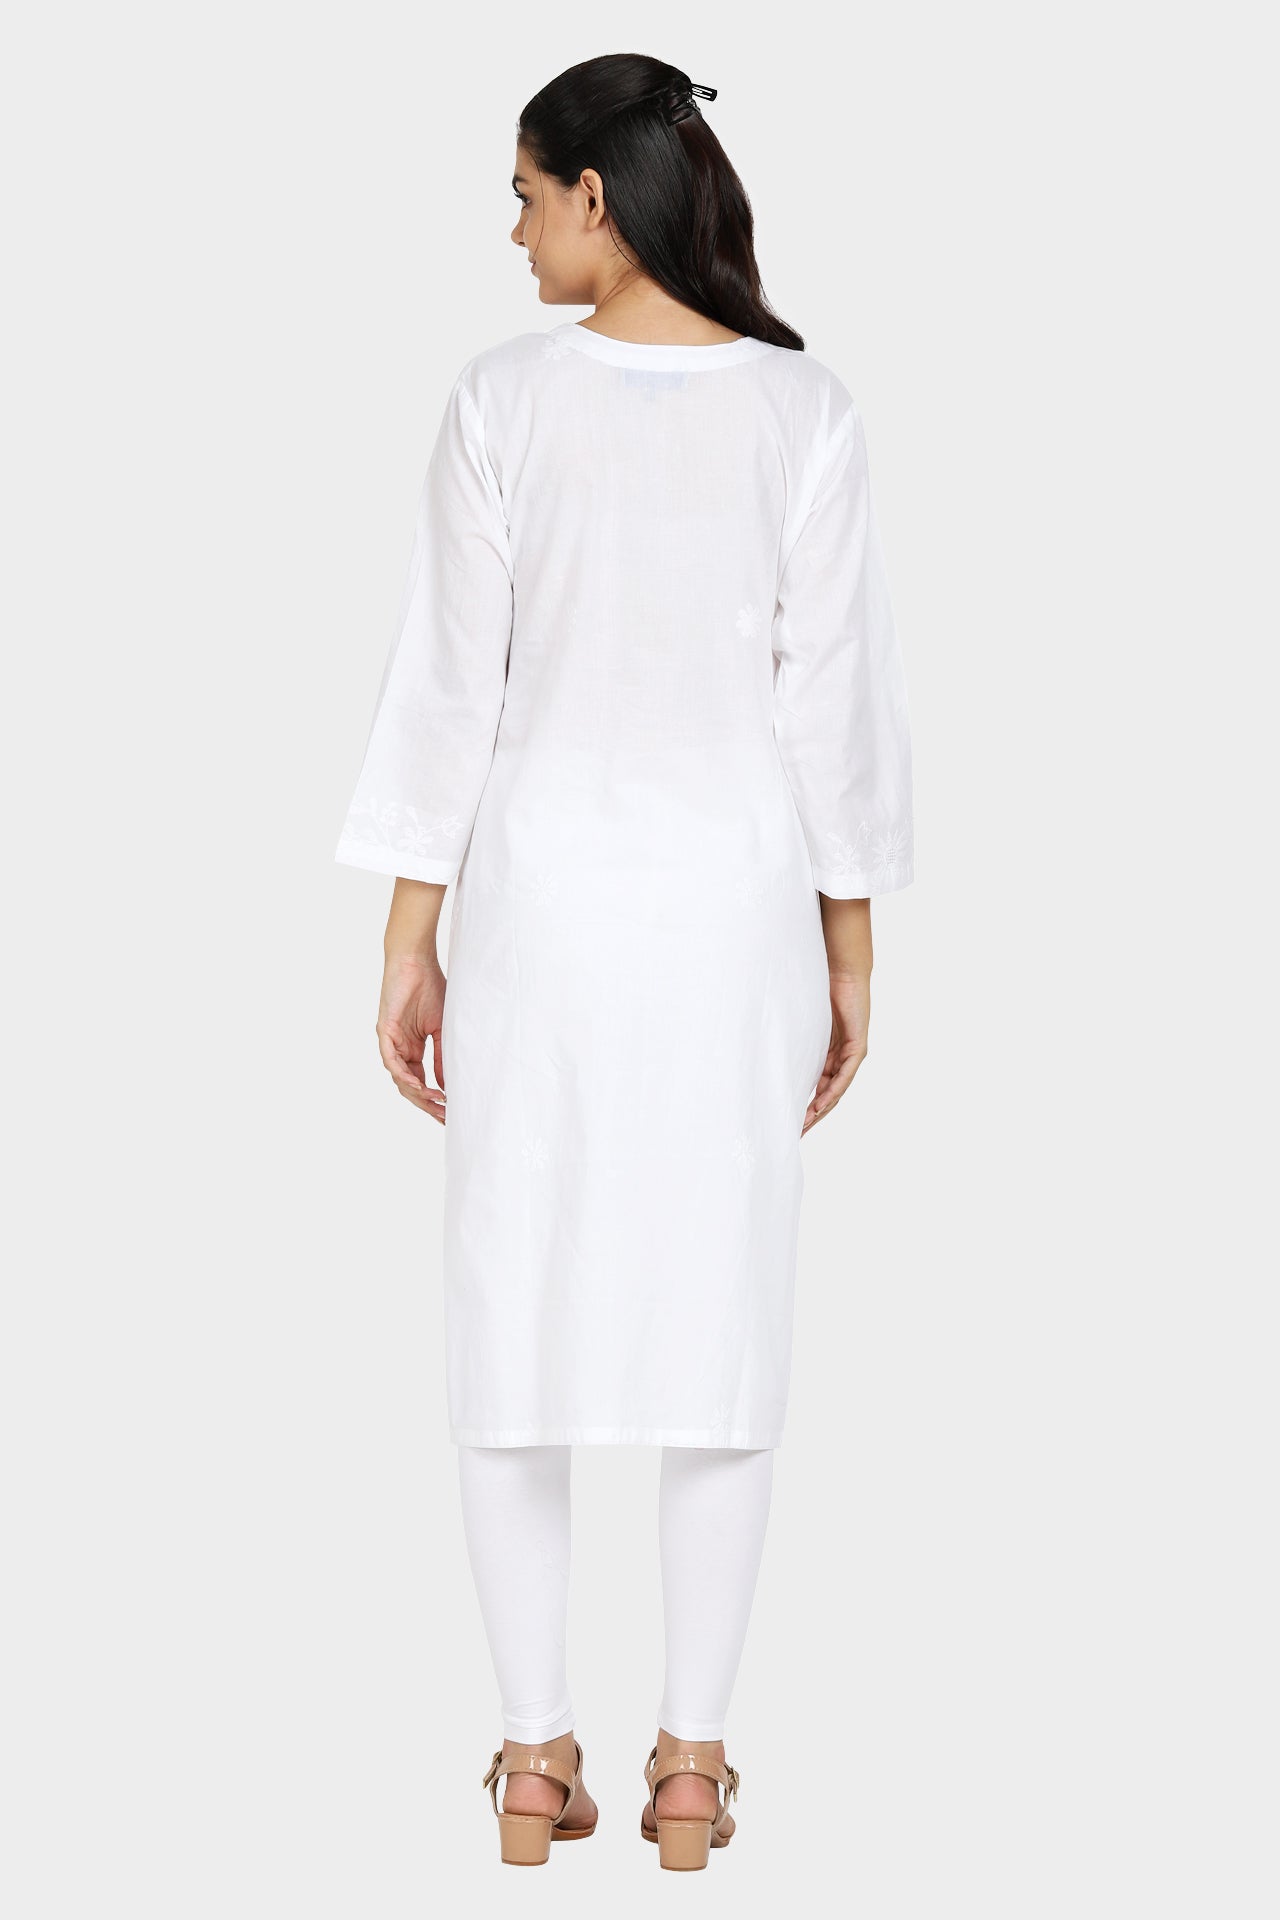 White on White Floral Hand Embroidered Cotton Kurta with Button Detailing